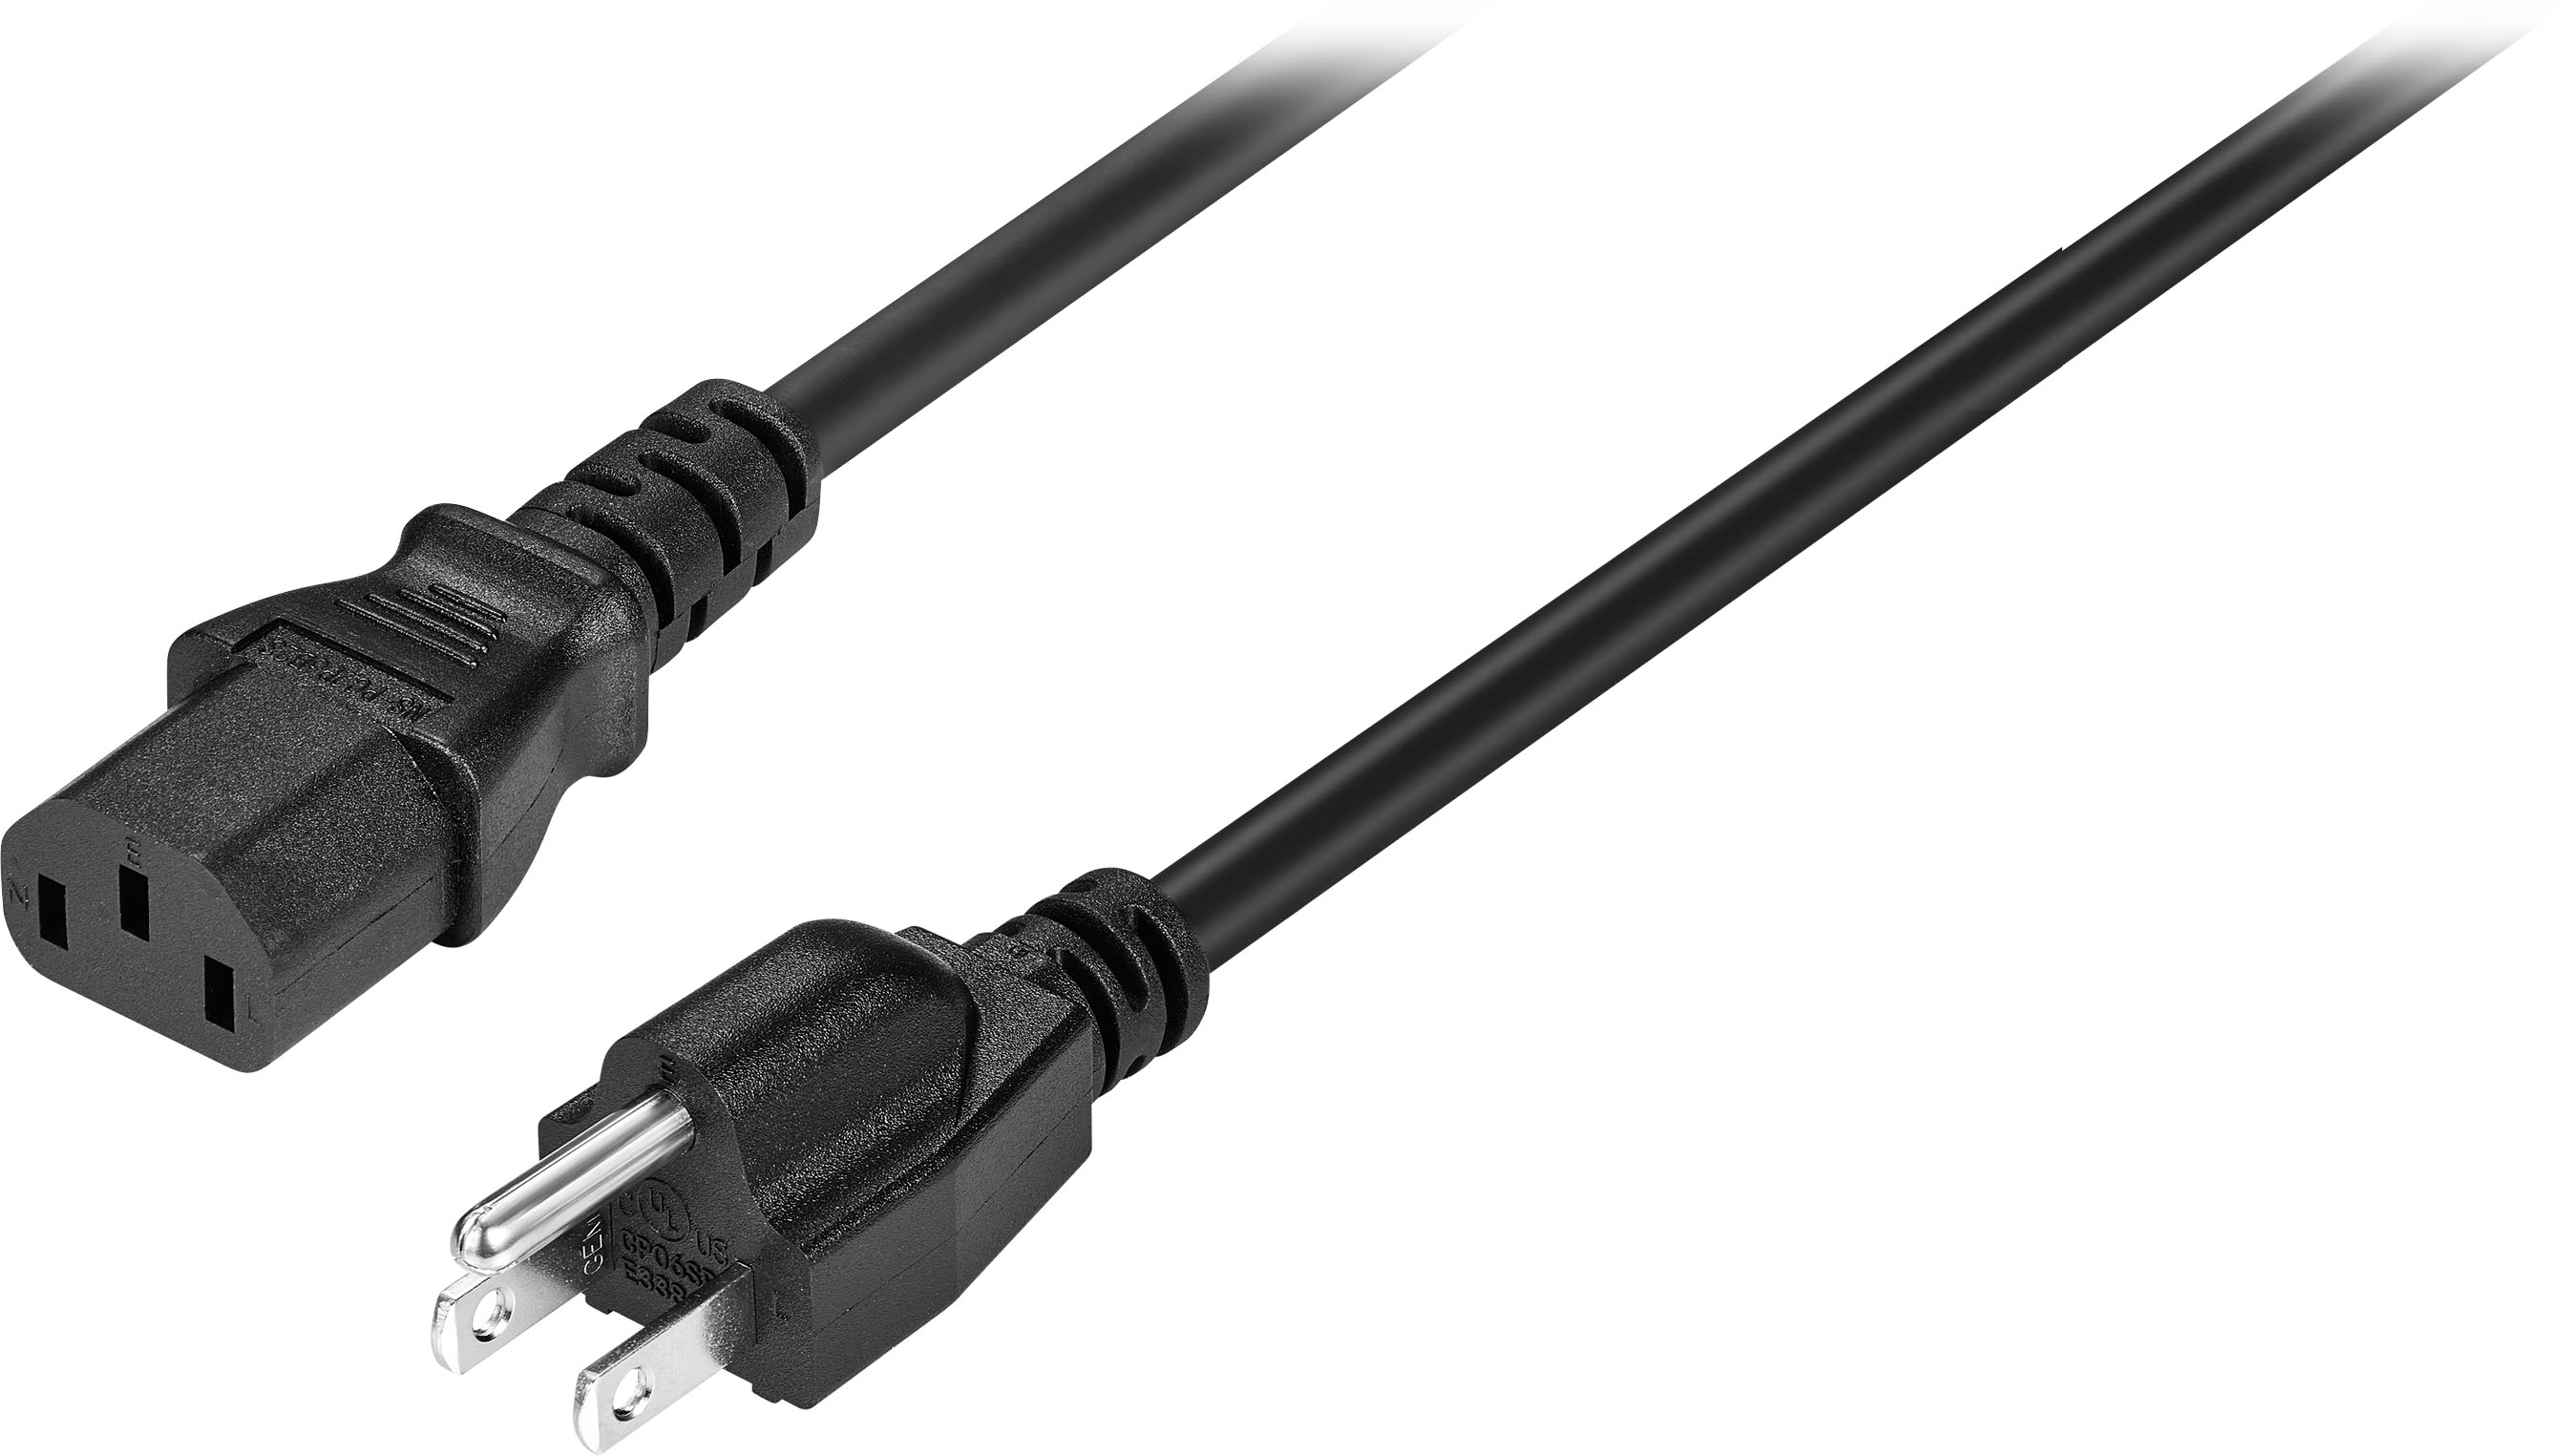 Insignia™ 6' USB to Mini-B Charge-and-Sync Cable Black NS-PC2AMU6 - Best Buy